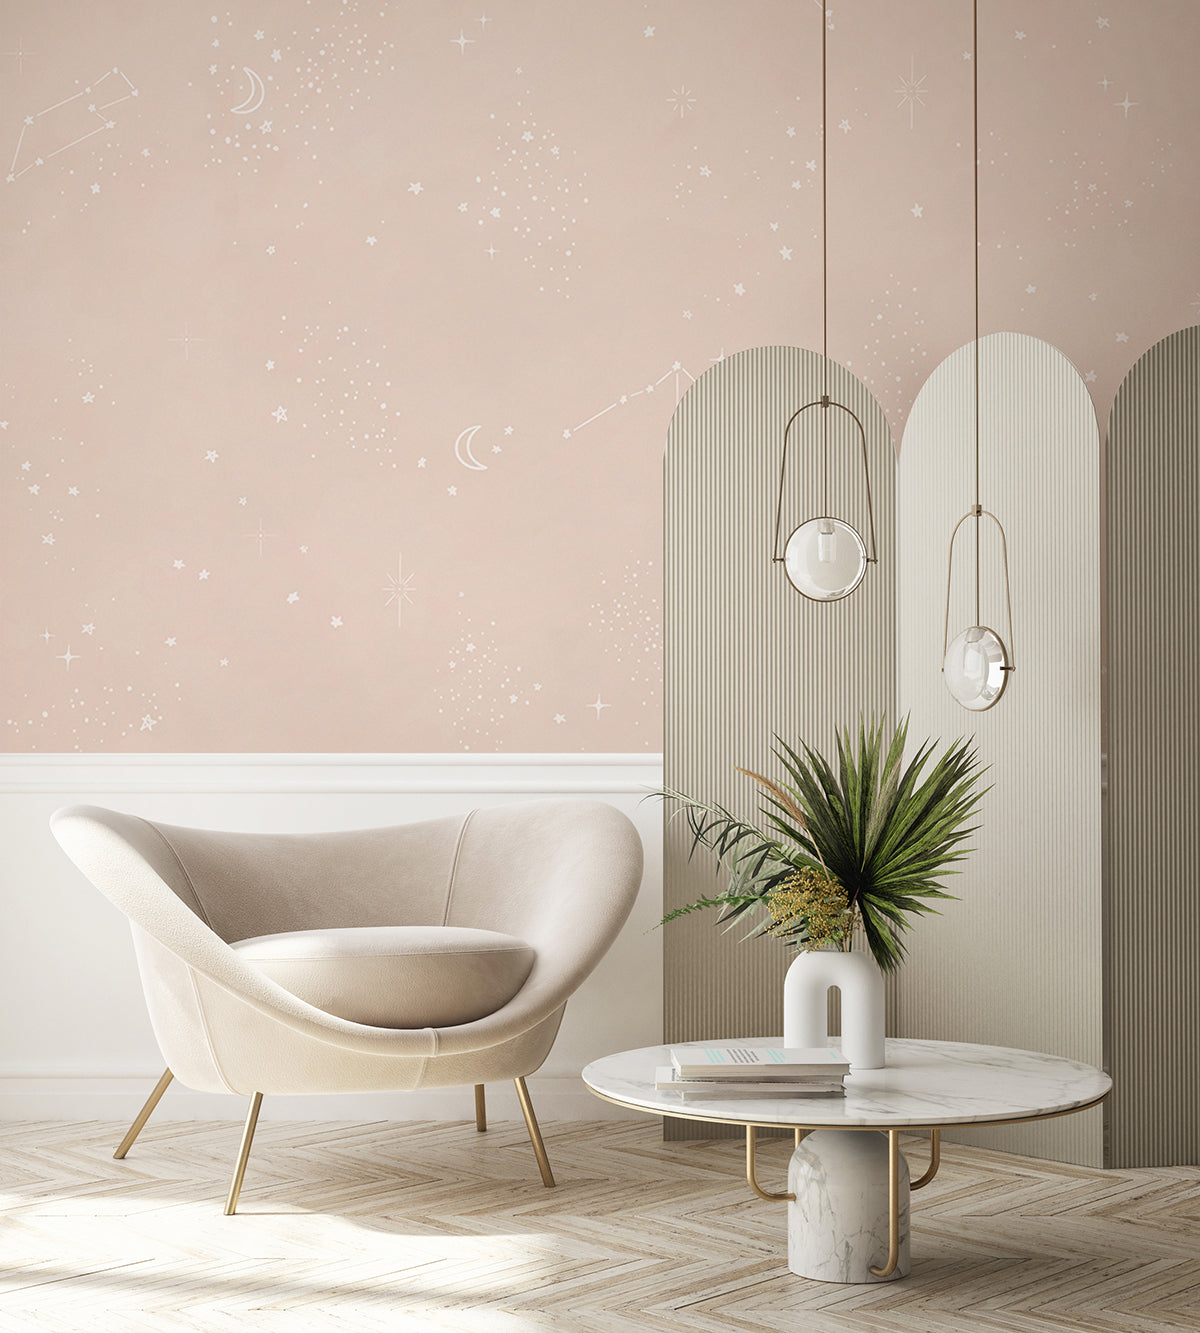 Chalky Stars, Pastel Pattern Wallpaper in Blush Pink in Living Room